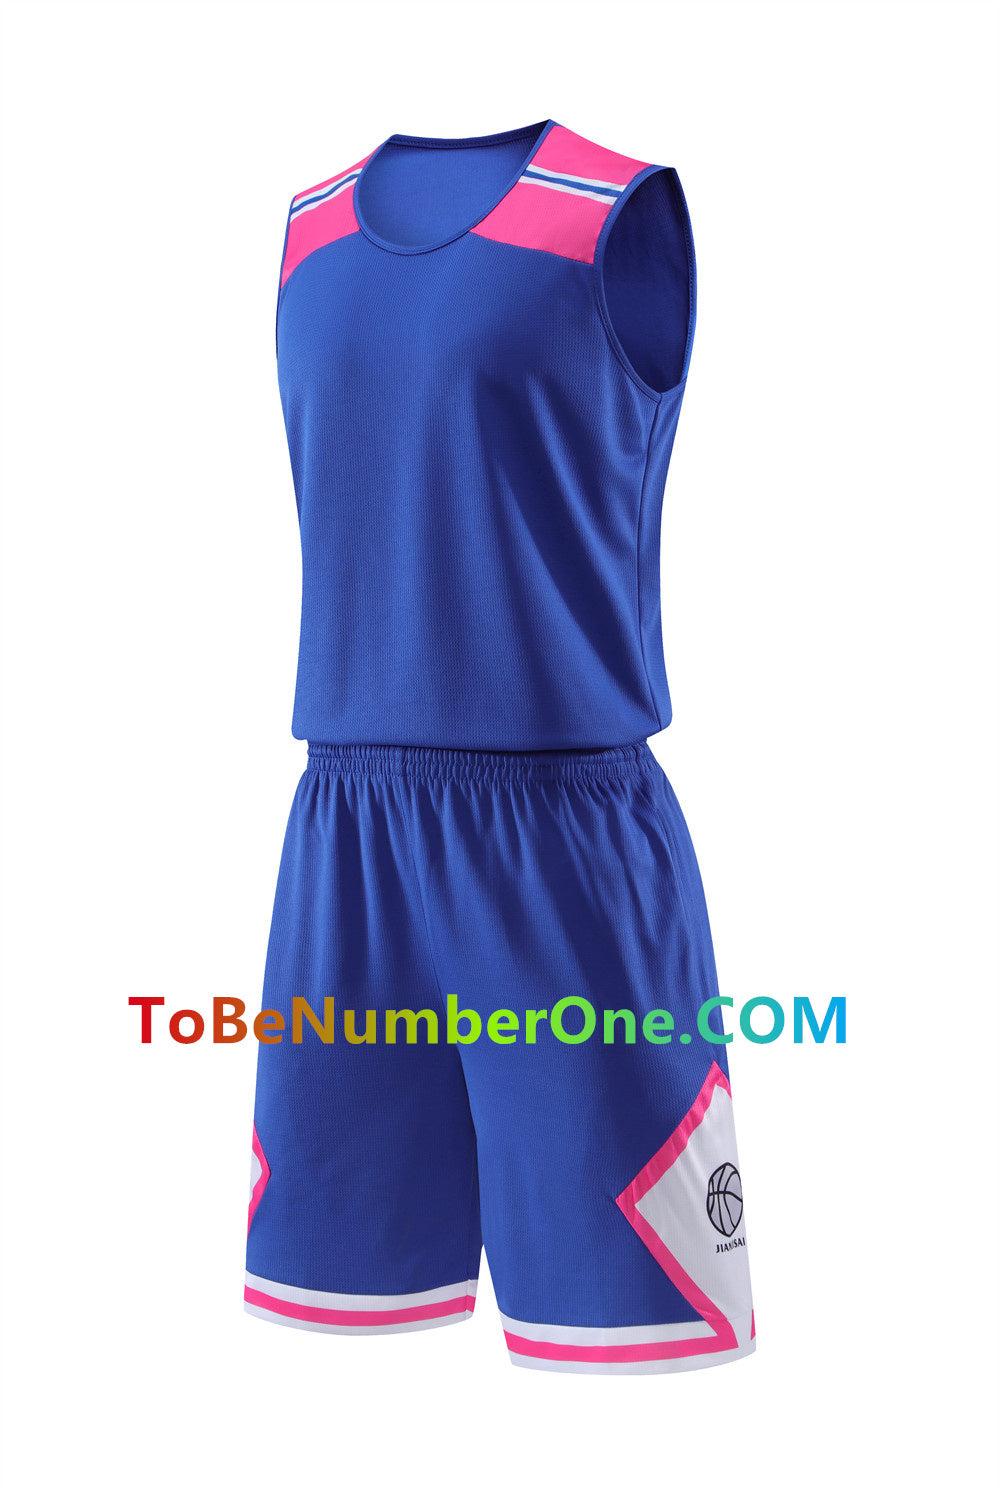 Customize instock High Quality Quick-drying basketball uniforms print with team name , player and number.  jerseys&shorts with pocket 608#